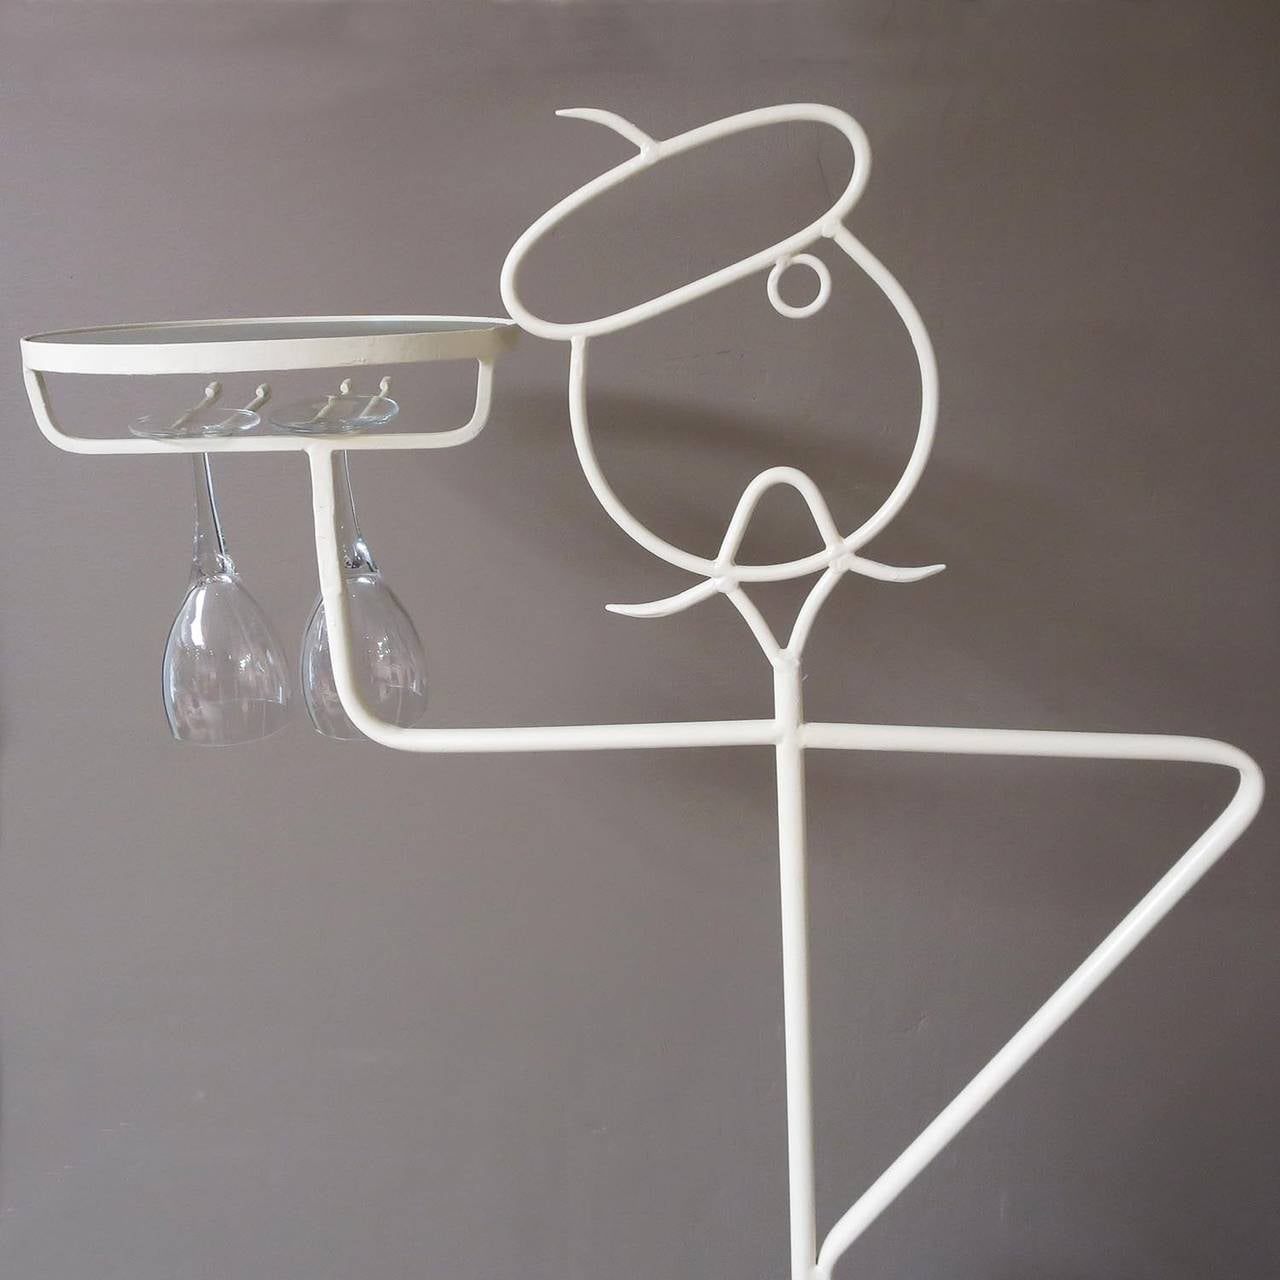 What better way to enjoy a bottle of your favorite French wine than from this beret topped French waiter? This whimsical sculpture is freshly painted steel, and looks great. The legs can accommodate up to fourteen bottles of a standard size. The